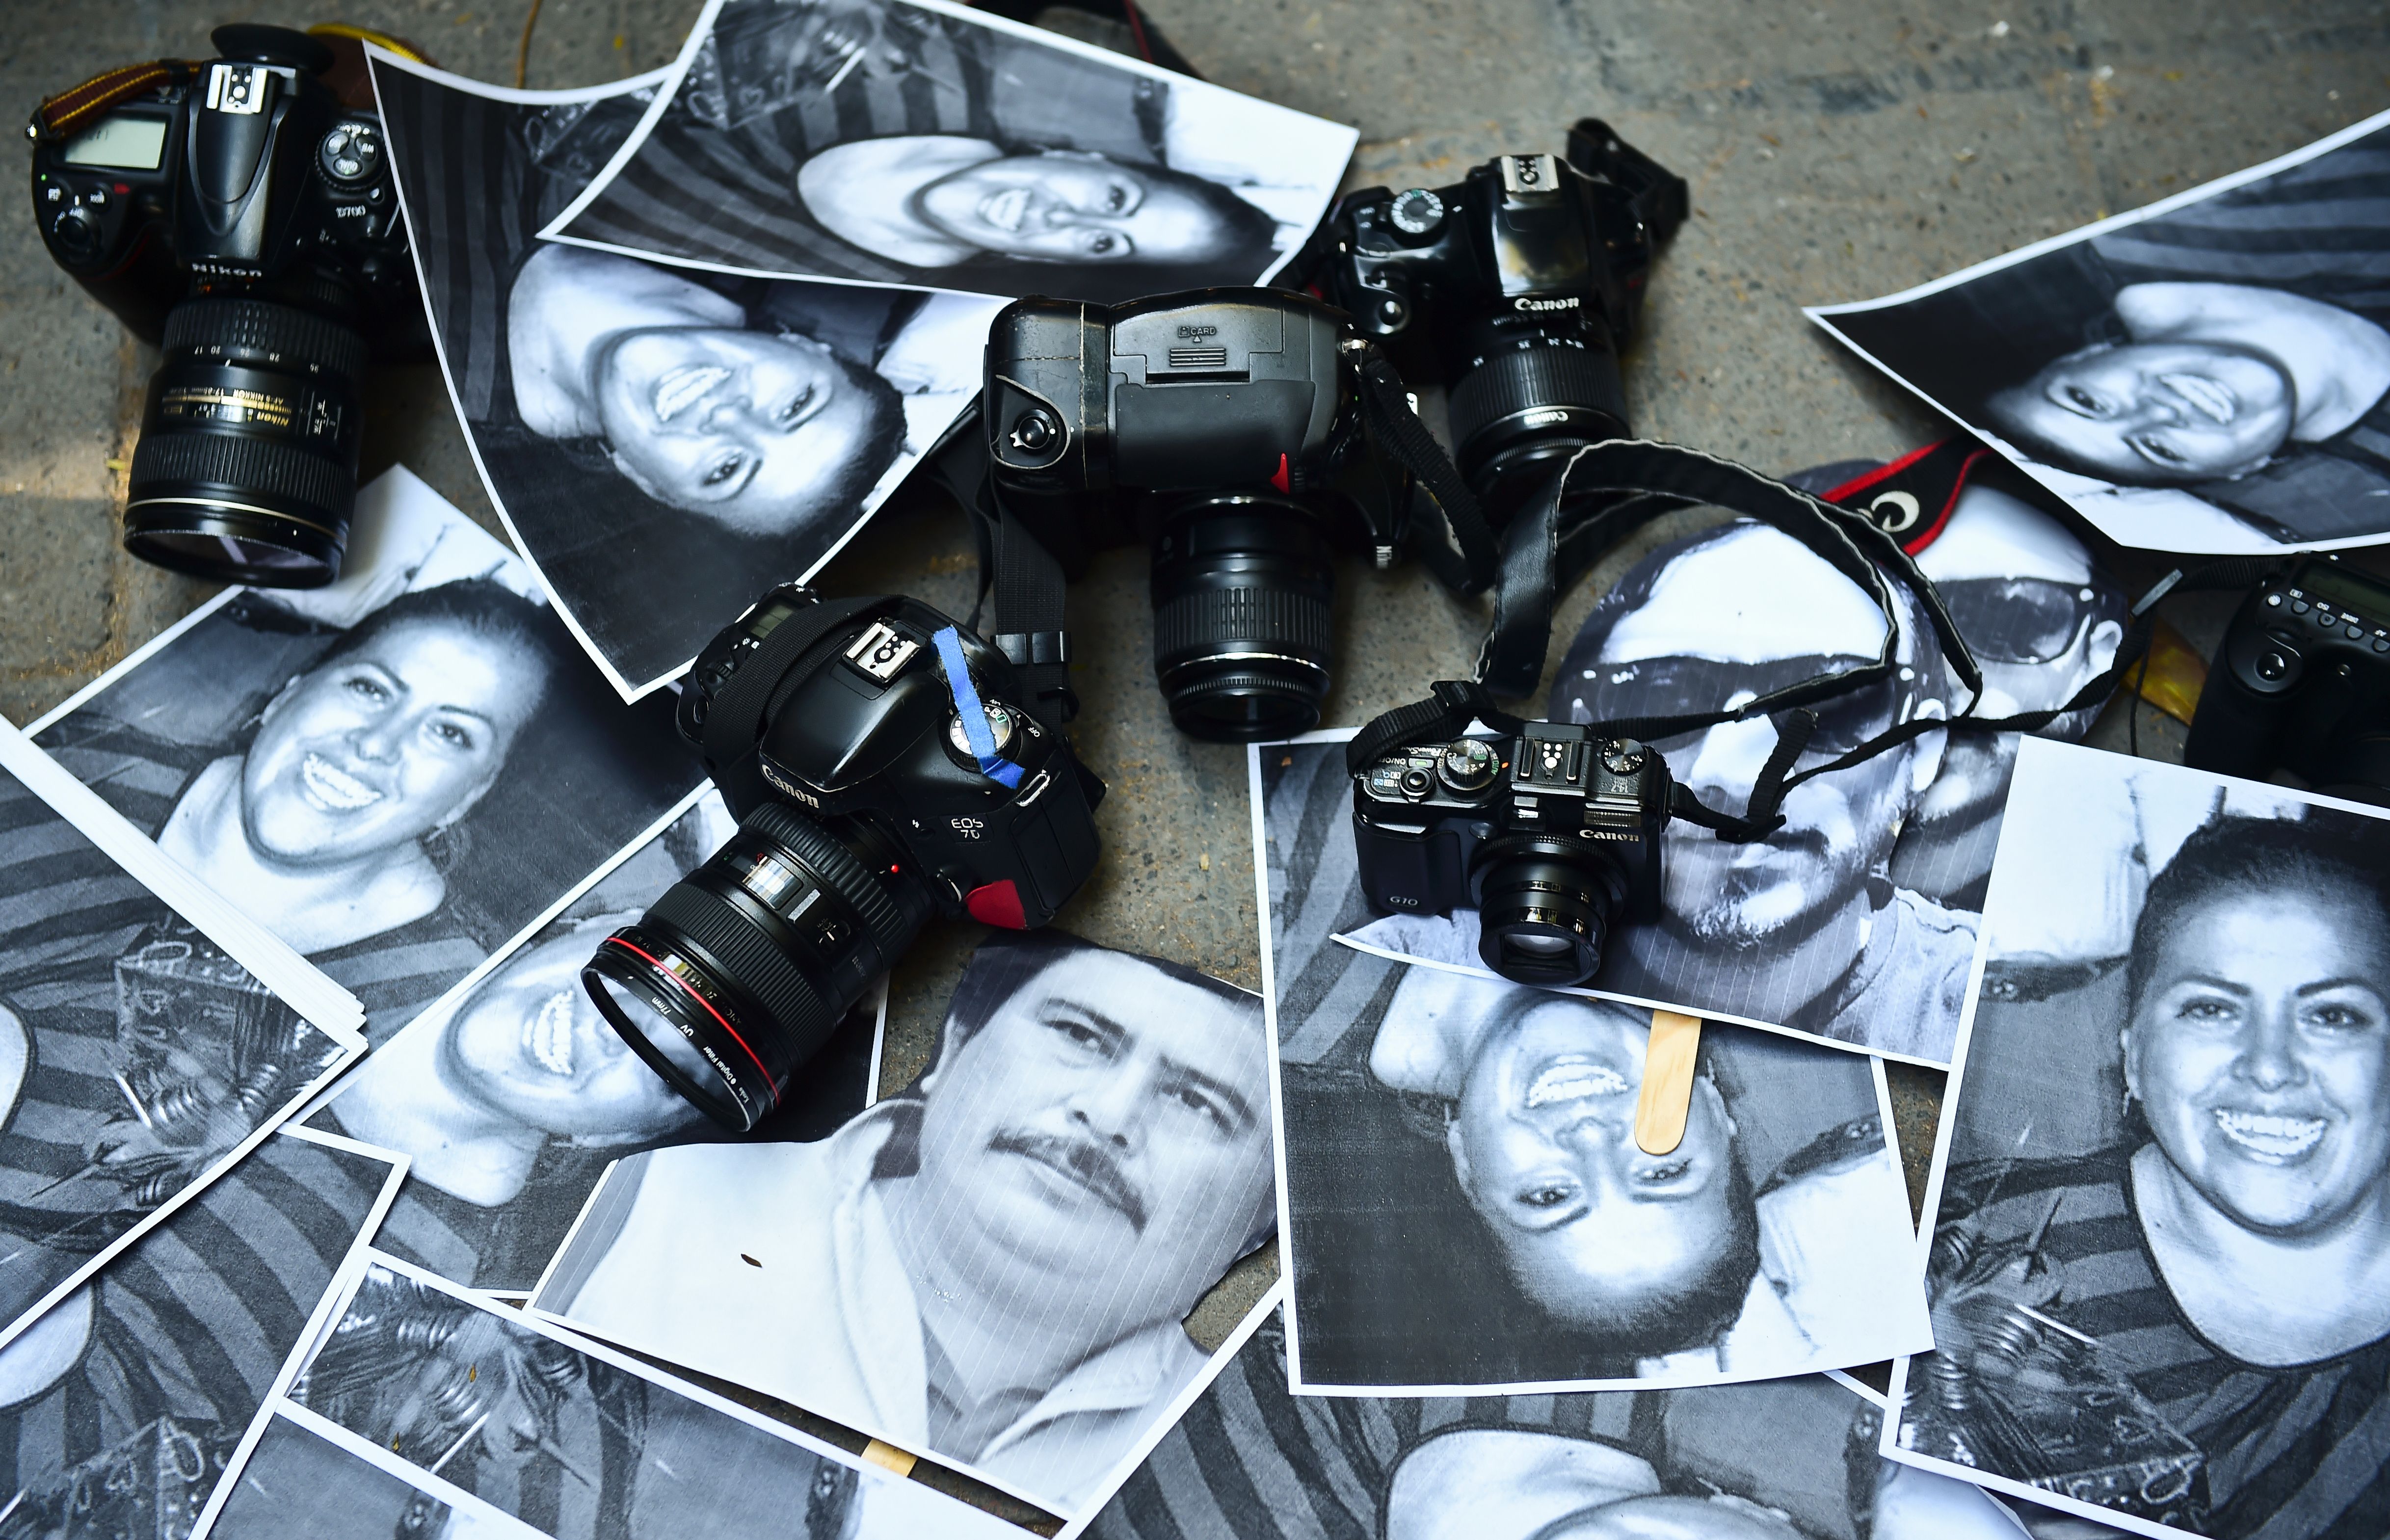 View of photos of killed journalists and cameras outside the Veracruz state representation office during a journalists protest in Mexico City on February 11, 2016. Mexican journalist Anabel Flores Salazar's funeral took place Wednesday after she was found killed at a road after being kidnapped Monday in Veracruz state, one of the most dangerous for journalists.  AFP PHOTO/RONALDO SCHEMIDT / AFP / RONALDO SCHEMIDT        (Photo credit should read RONALDO SCHEMIDT/AFP/Getty Images)